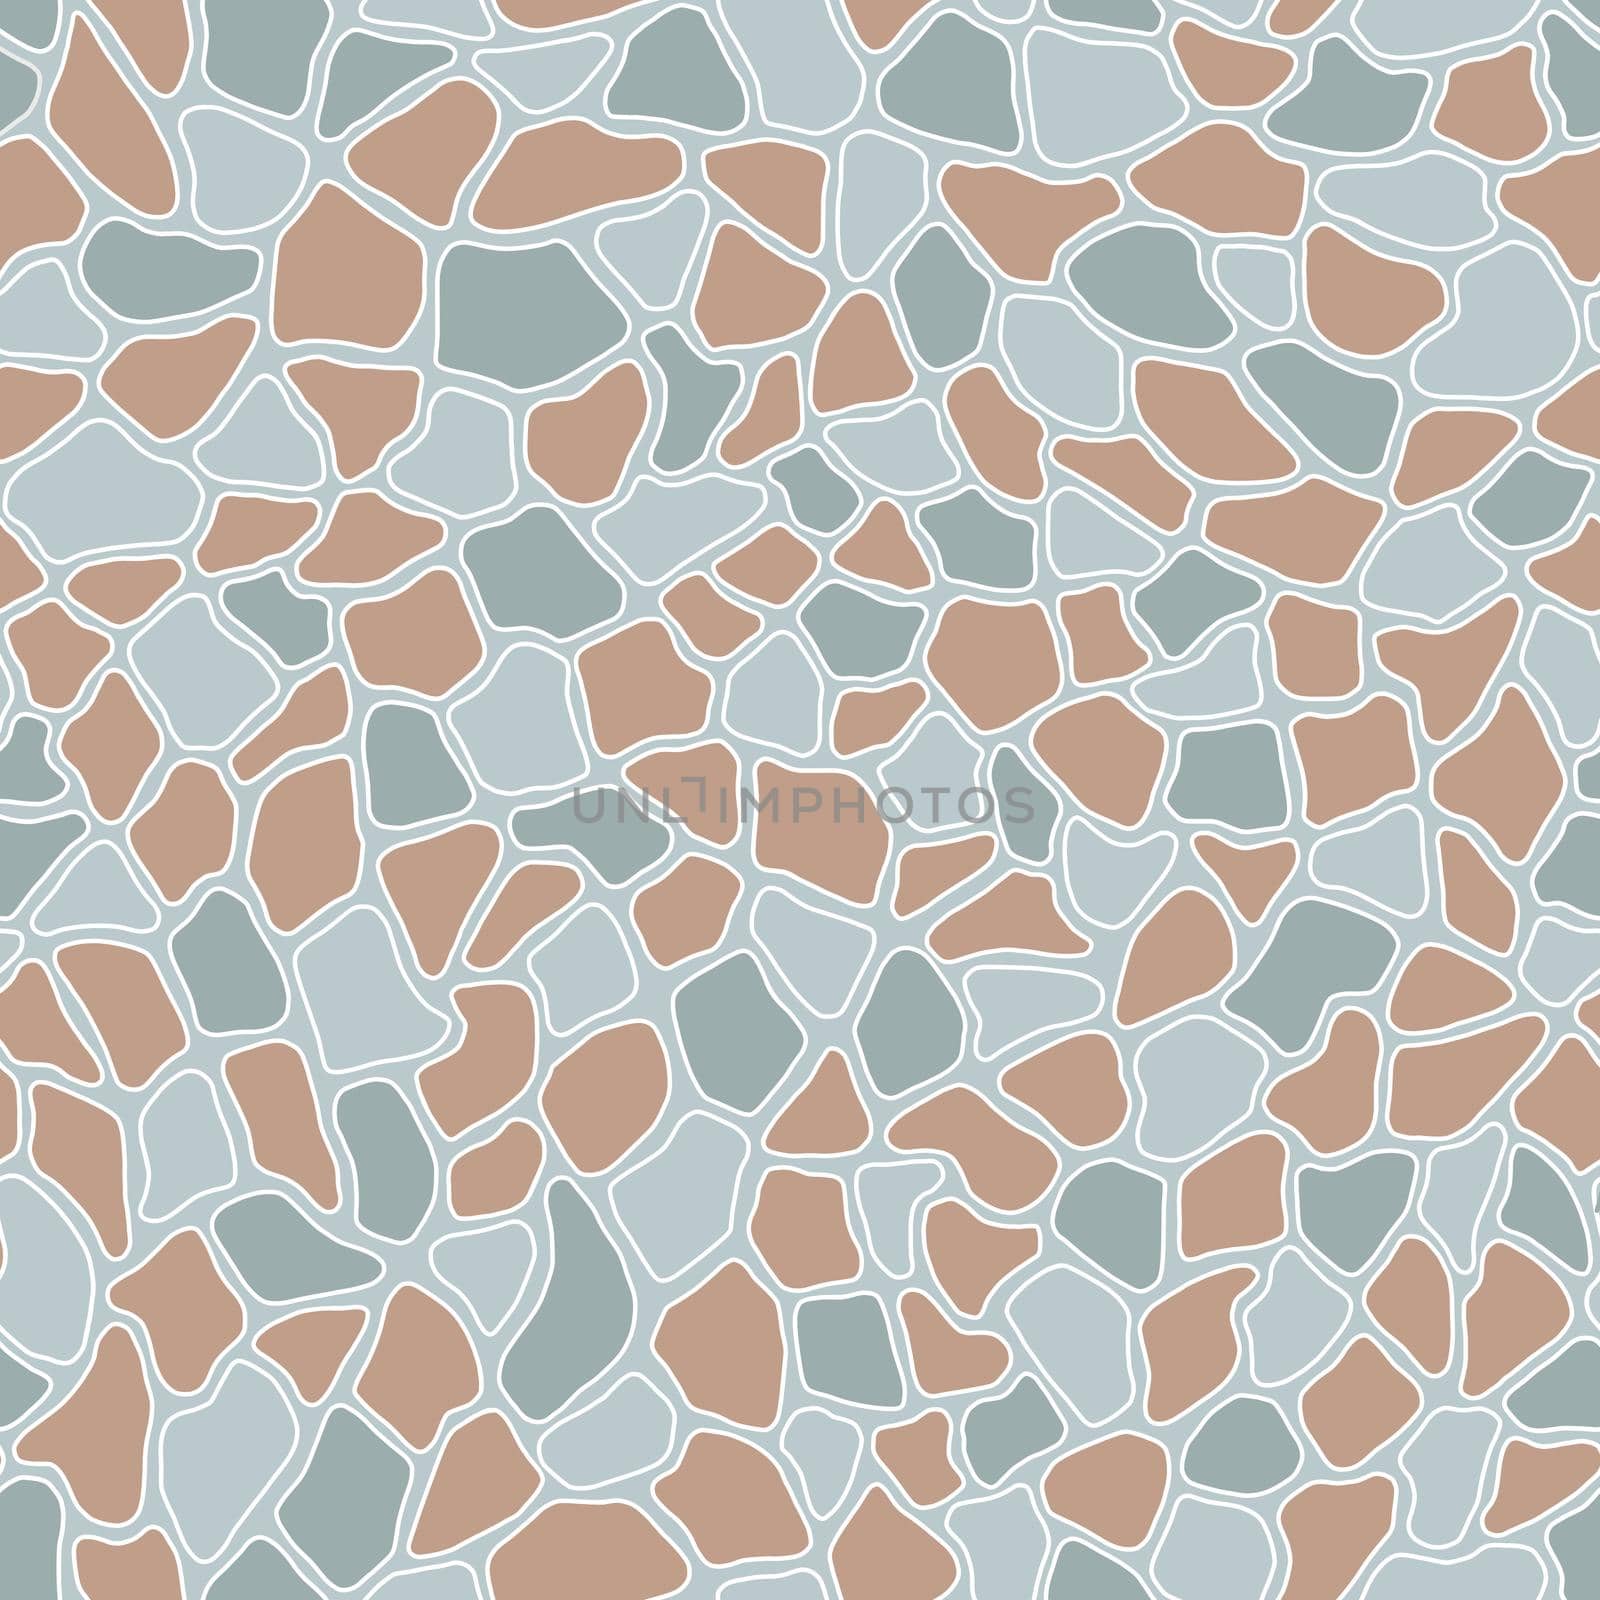 Terrazzo modern trendy colorful seamless pattern.Abstract creative backdrop with chaotic small pieces irregular shapes. Ideal for wrapping paper,textile,print,wallpaper,terrazzo flooring.Azure, beige.